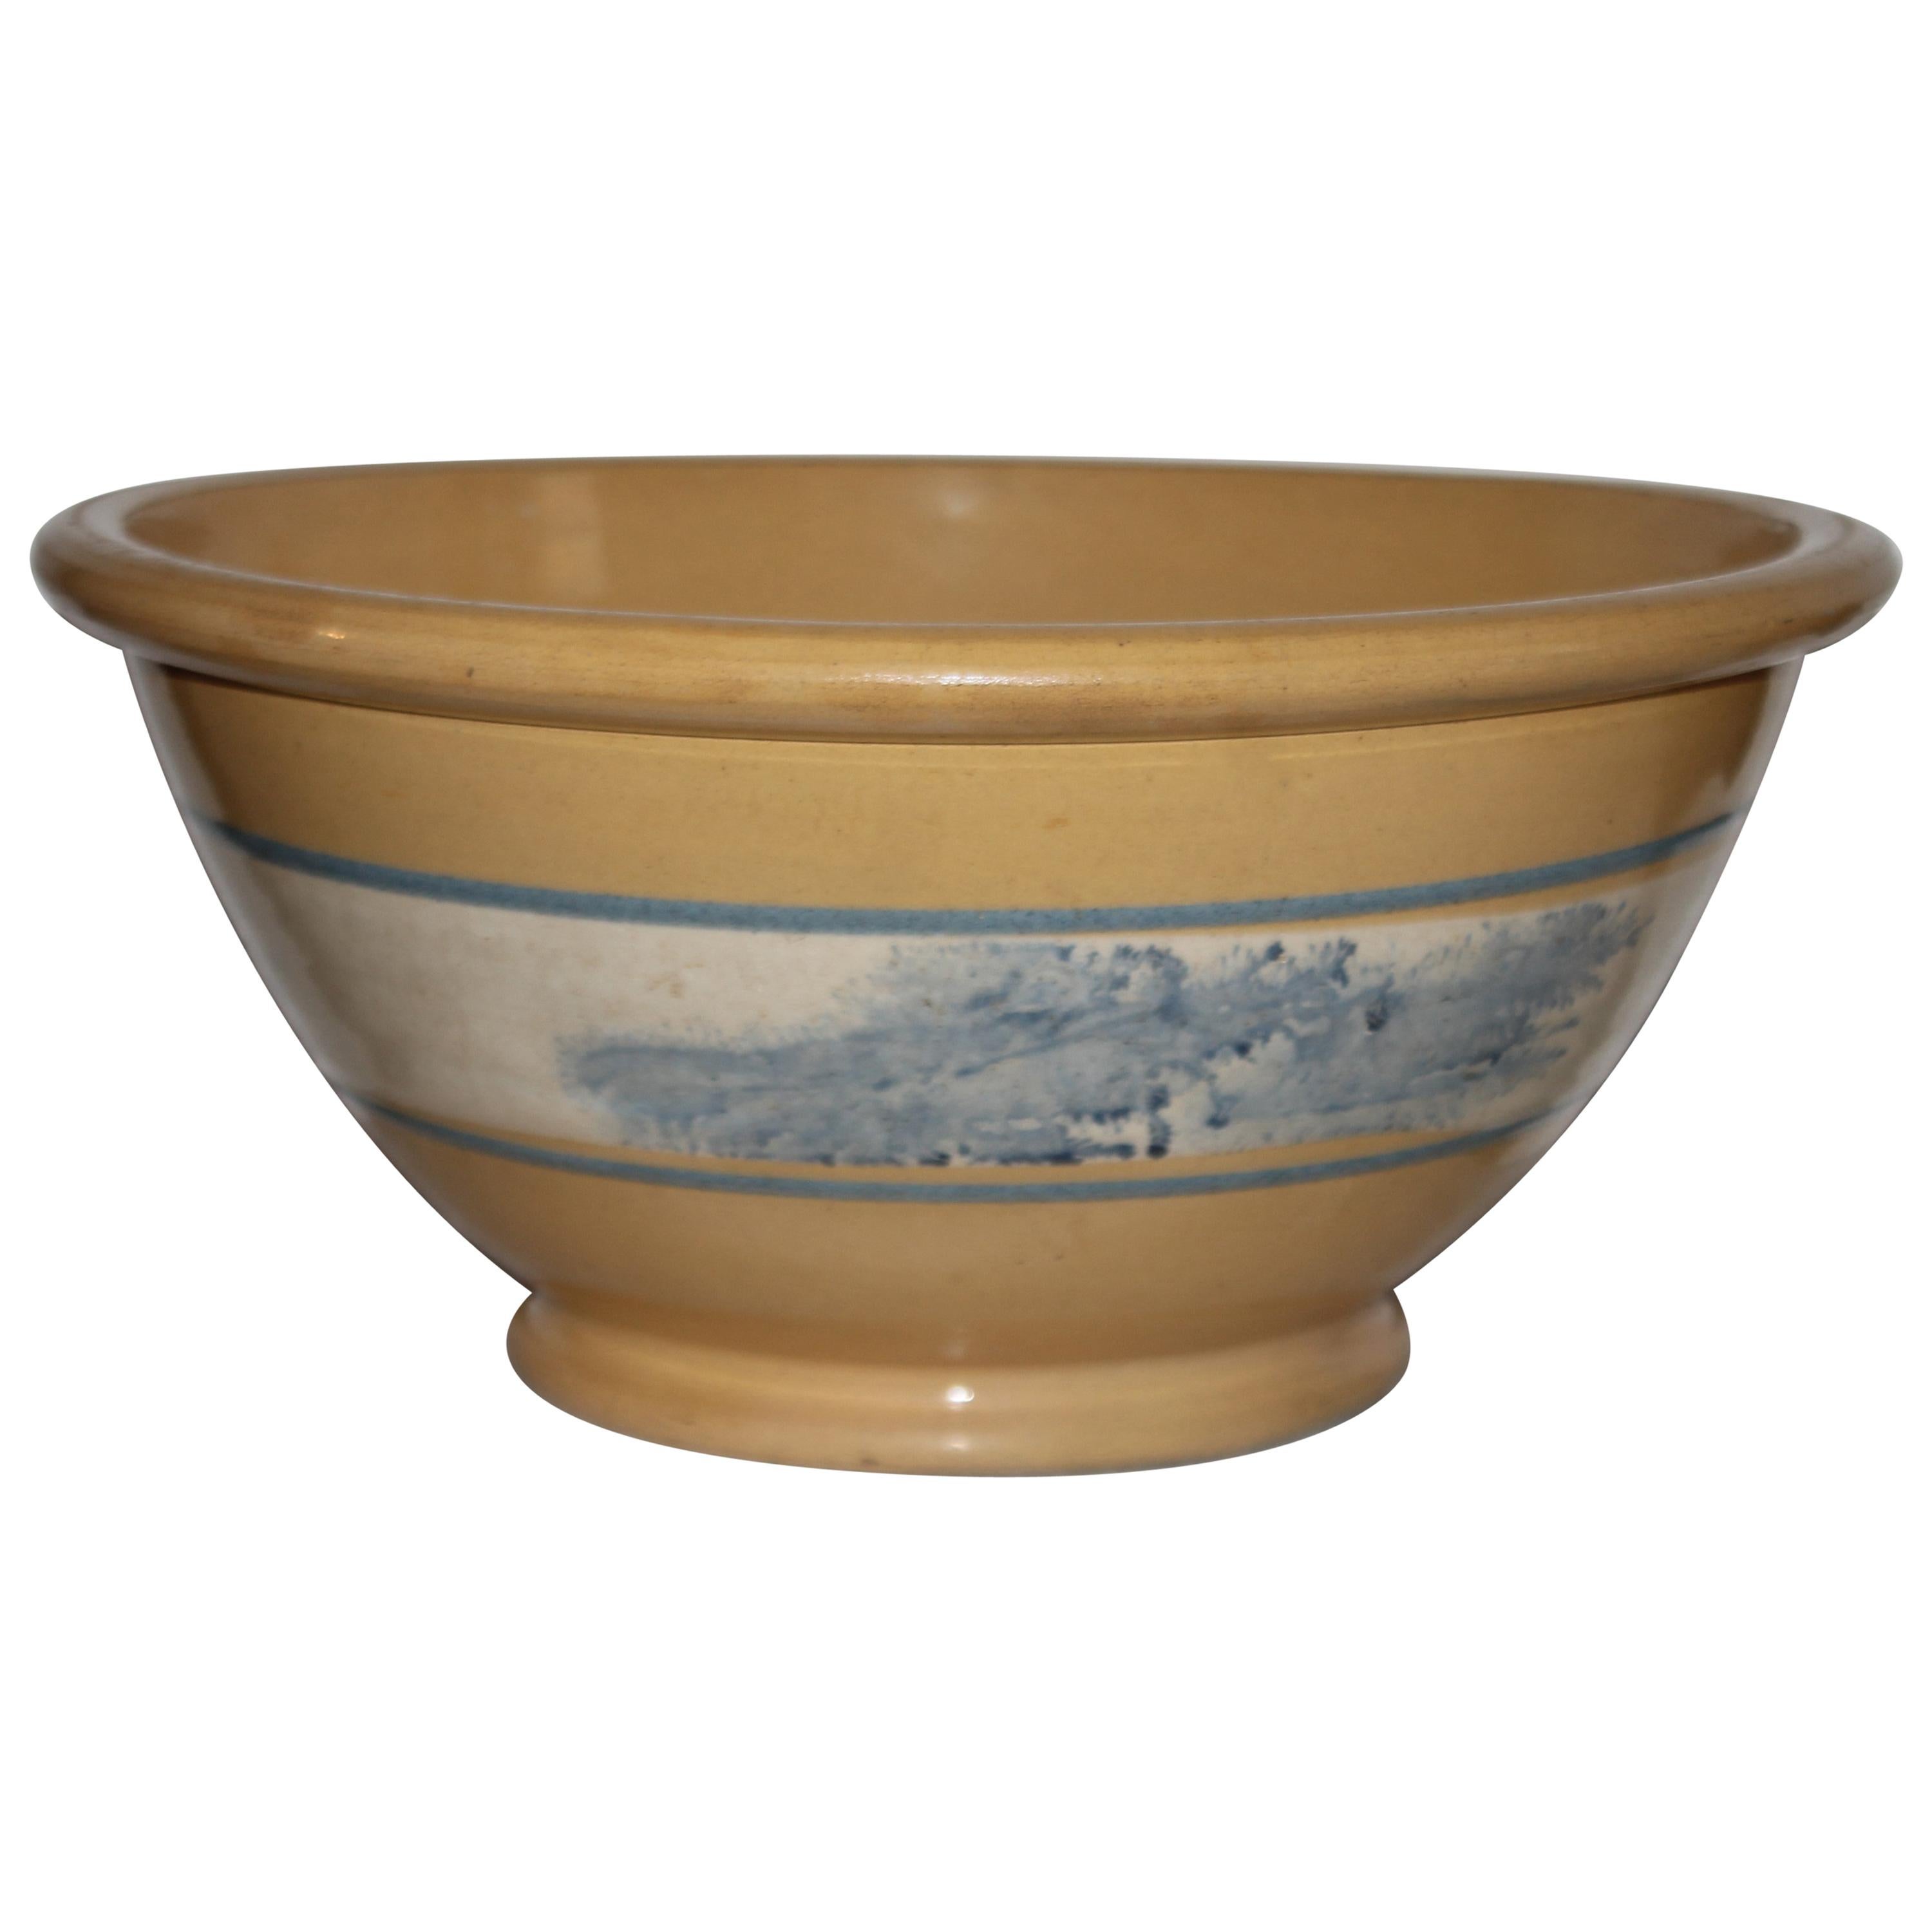 Monumental 19th Century Mocha Yellow Ware Mixing Bowl For Sale